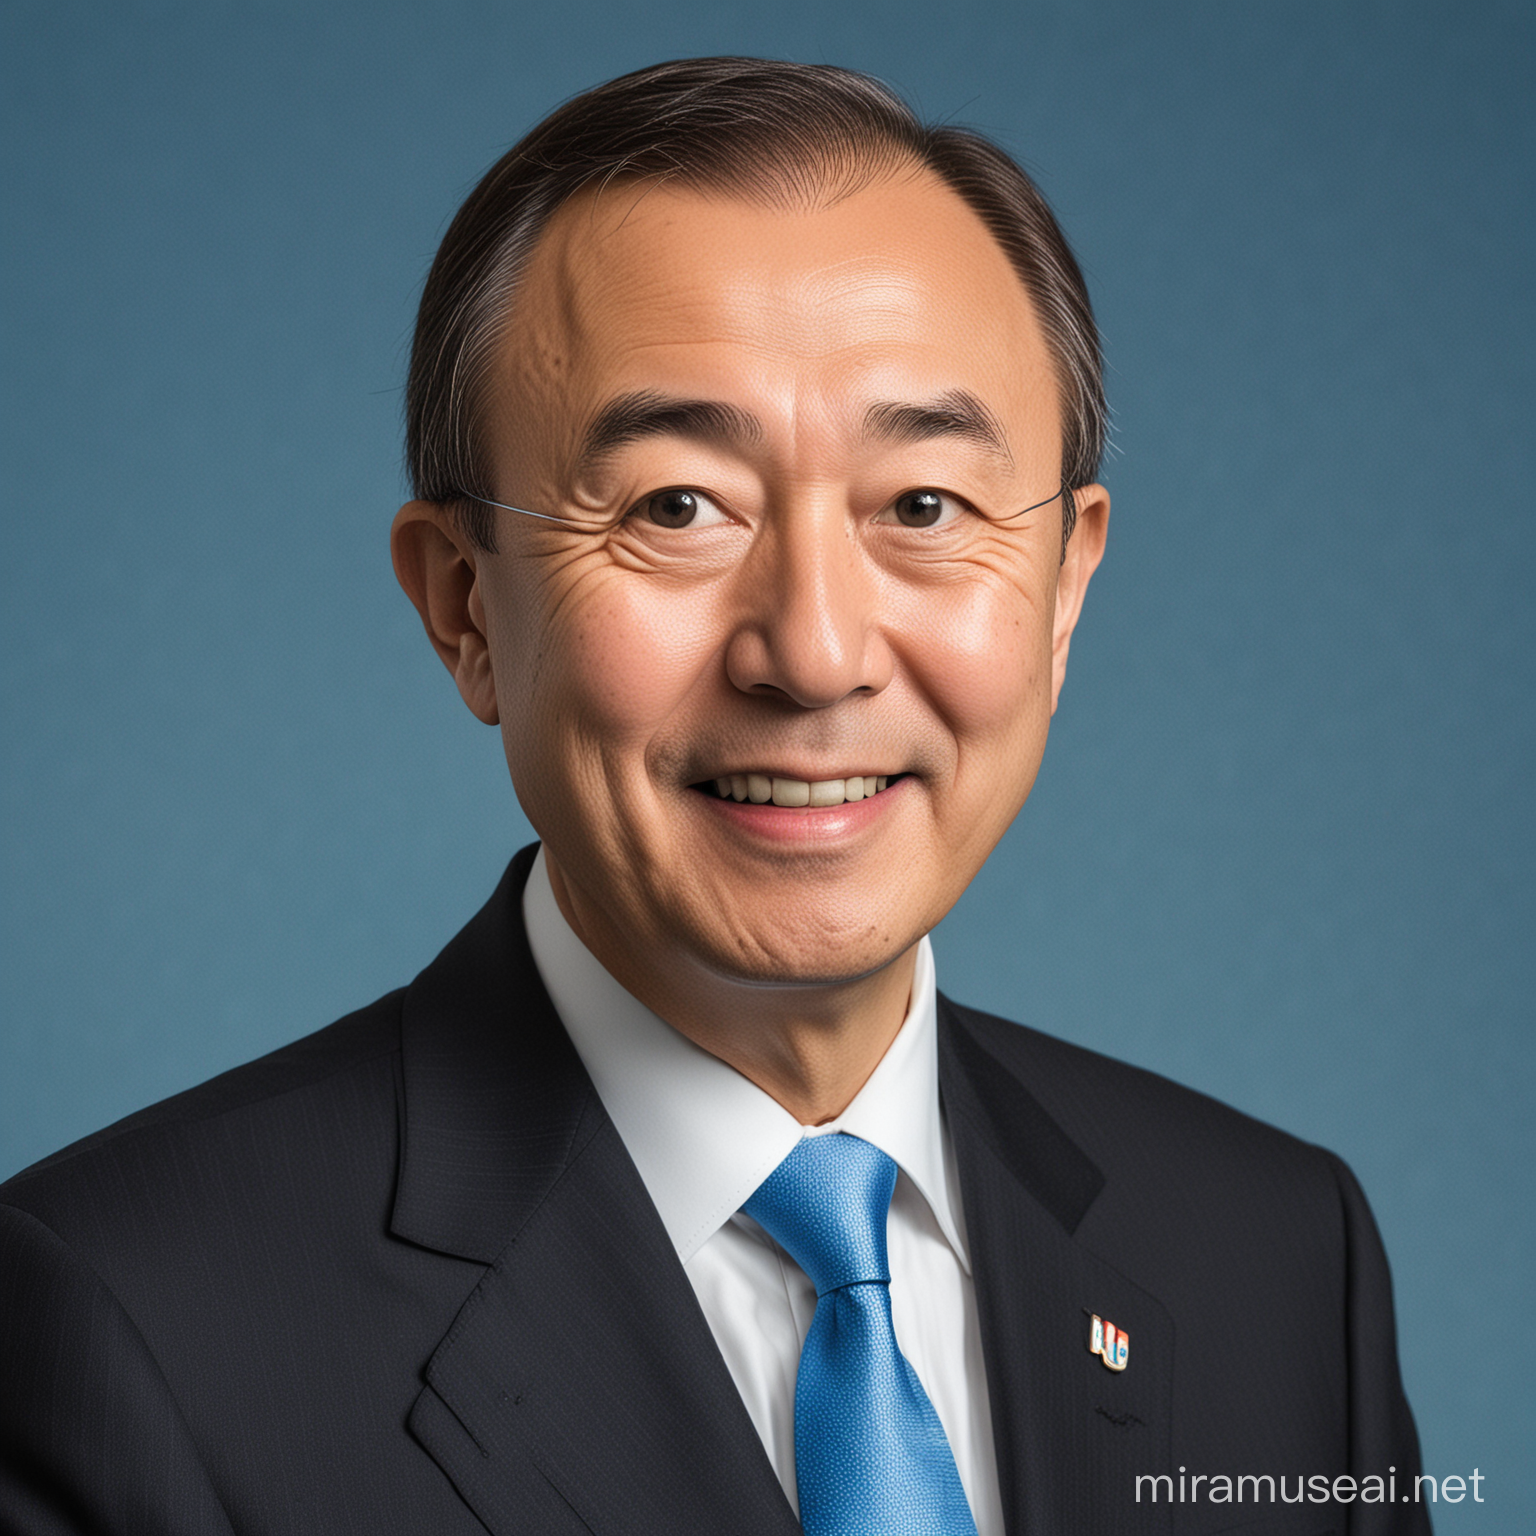 Ban Ki-moon(Former Secretary General, United Nations) with blue background
